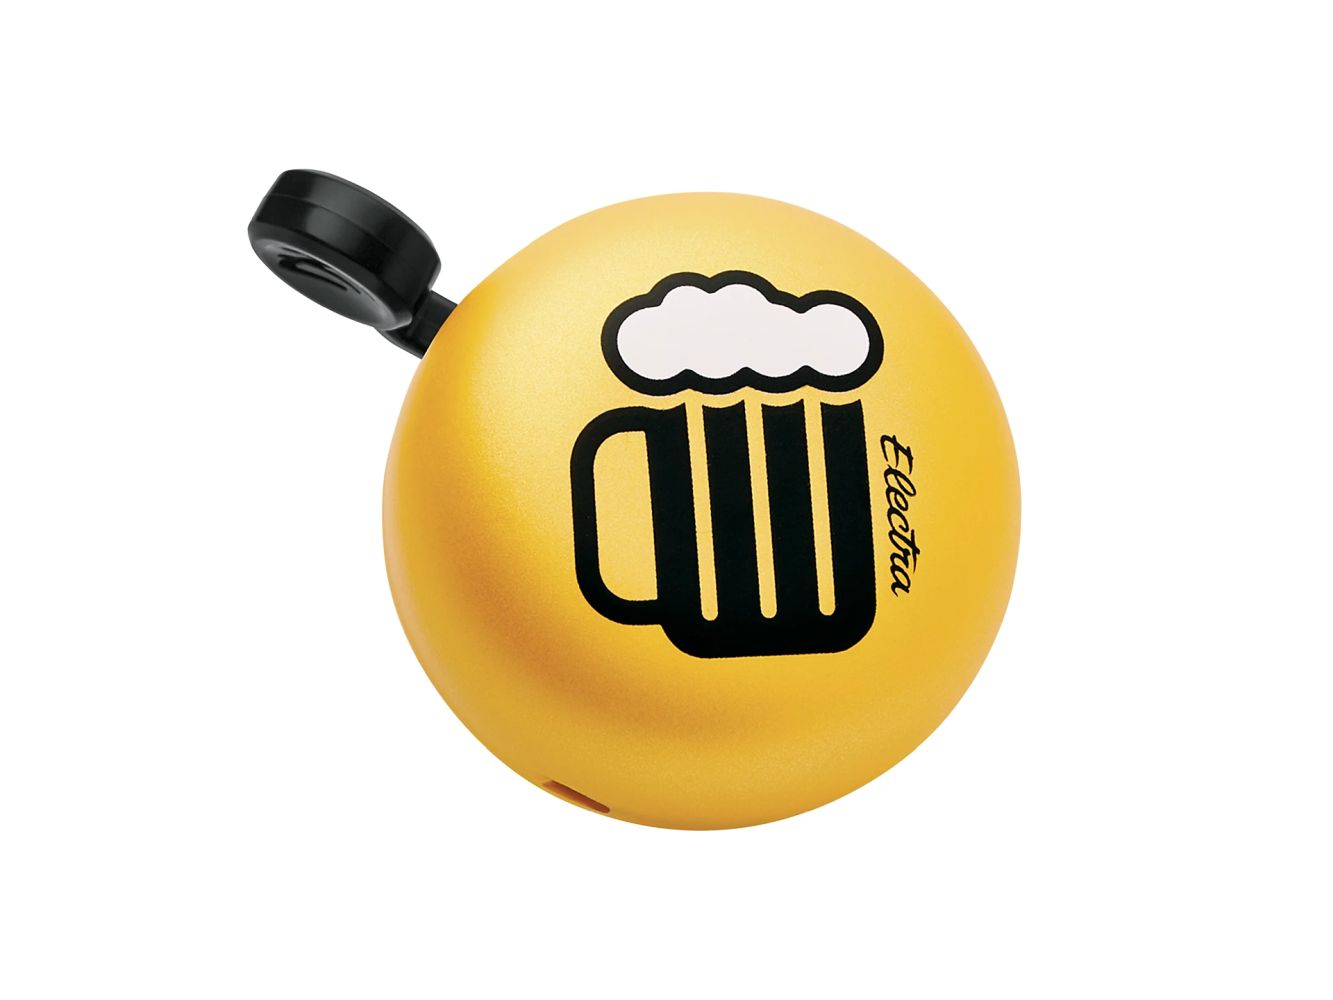 Electra Cheers Domed Ringer Bike Bell Cheers 